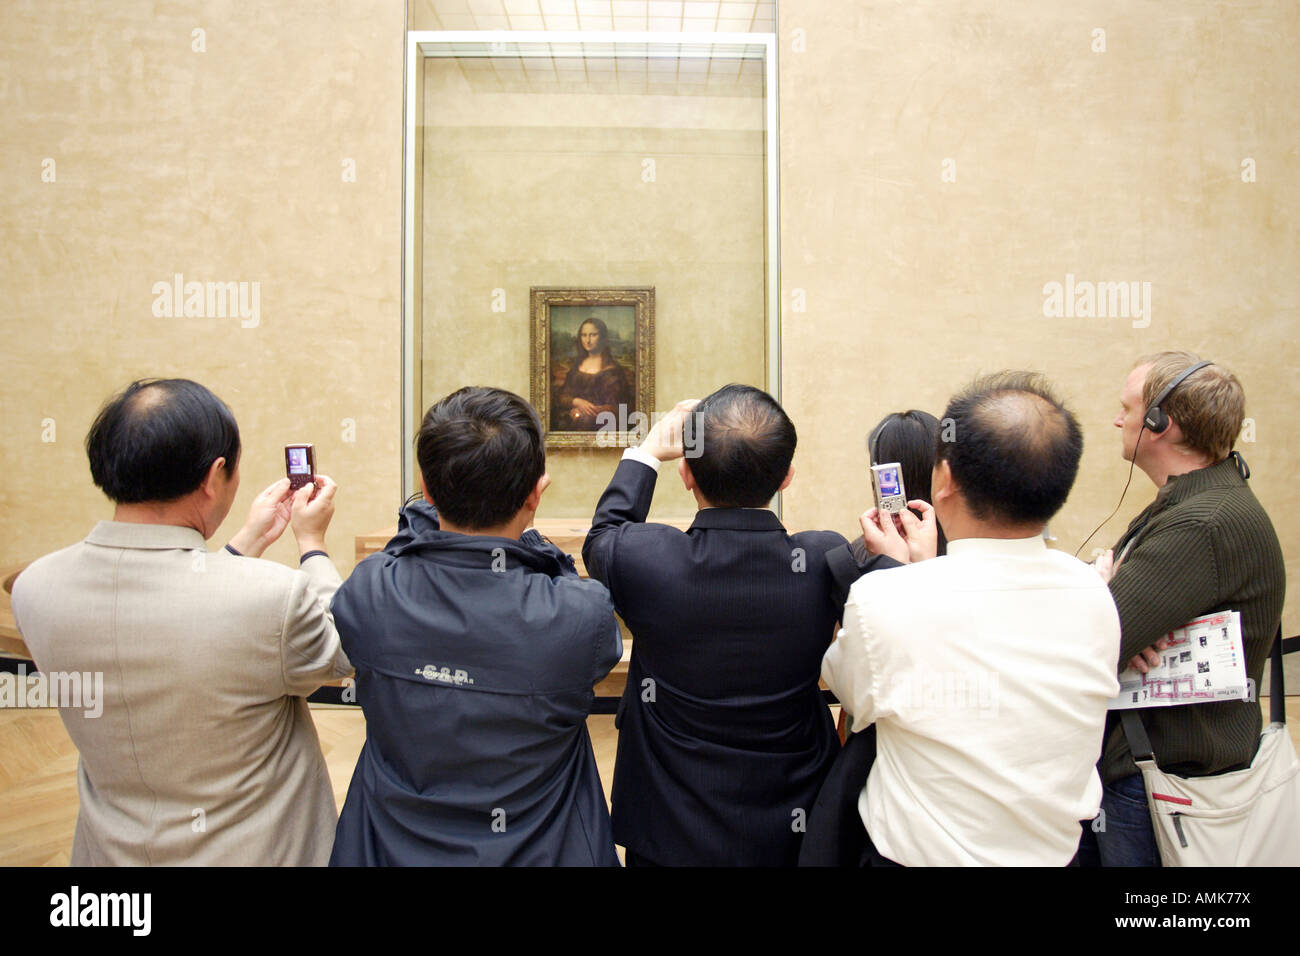 Tourists taking pictures of the Mona Lisa at the Louvre Museum, Paris, France Stock Photo